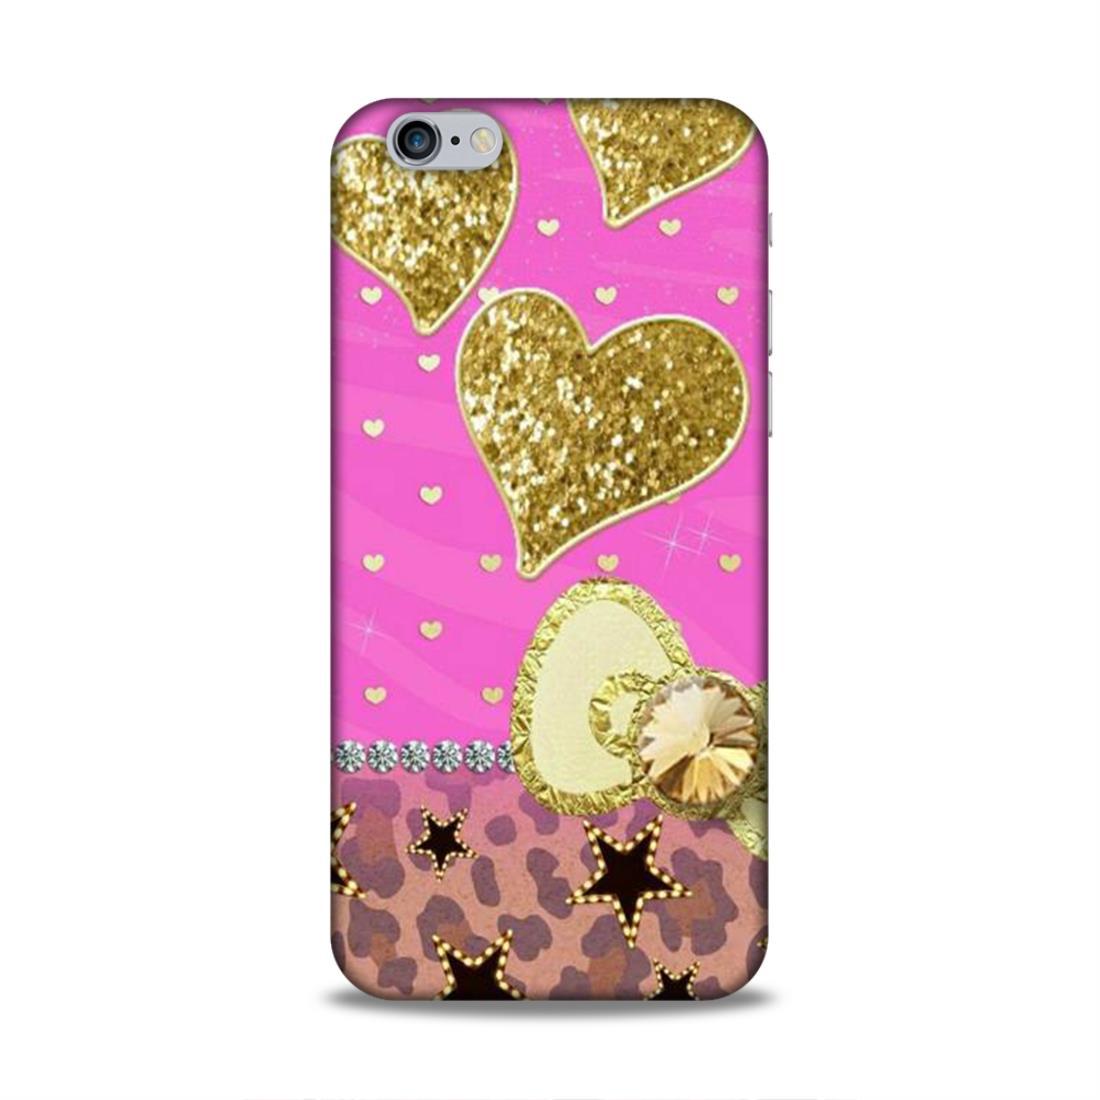 Cute Pink Heart iPhone 6s Phone Case Cover